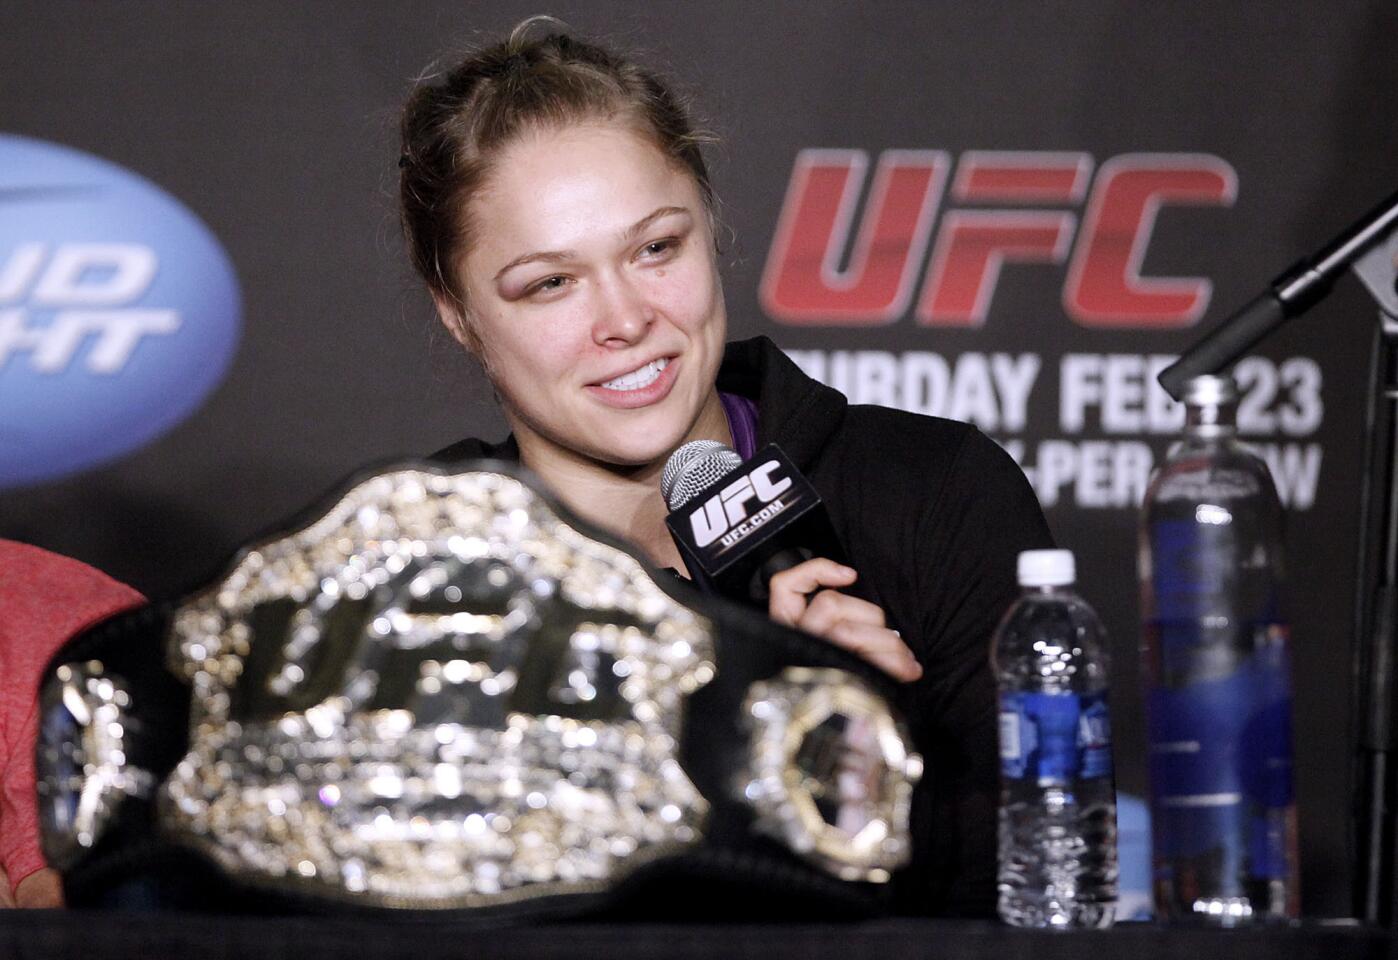 Photo Gallery: Glendale Fighting Club's Ronda Rousey retains title in UFC157